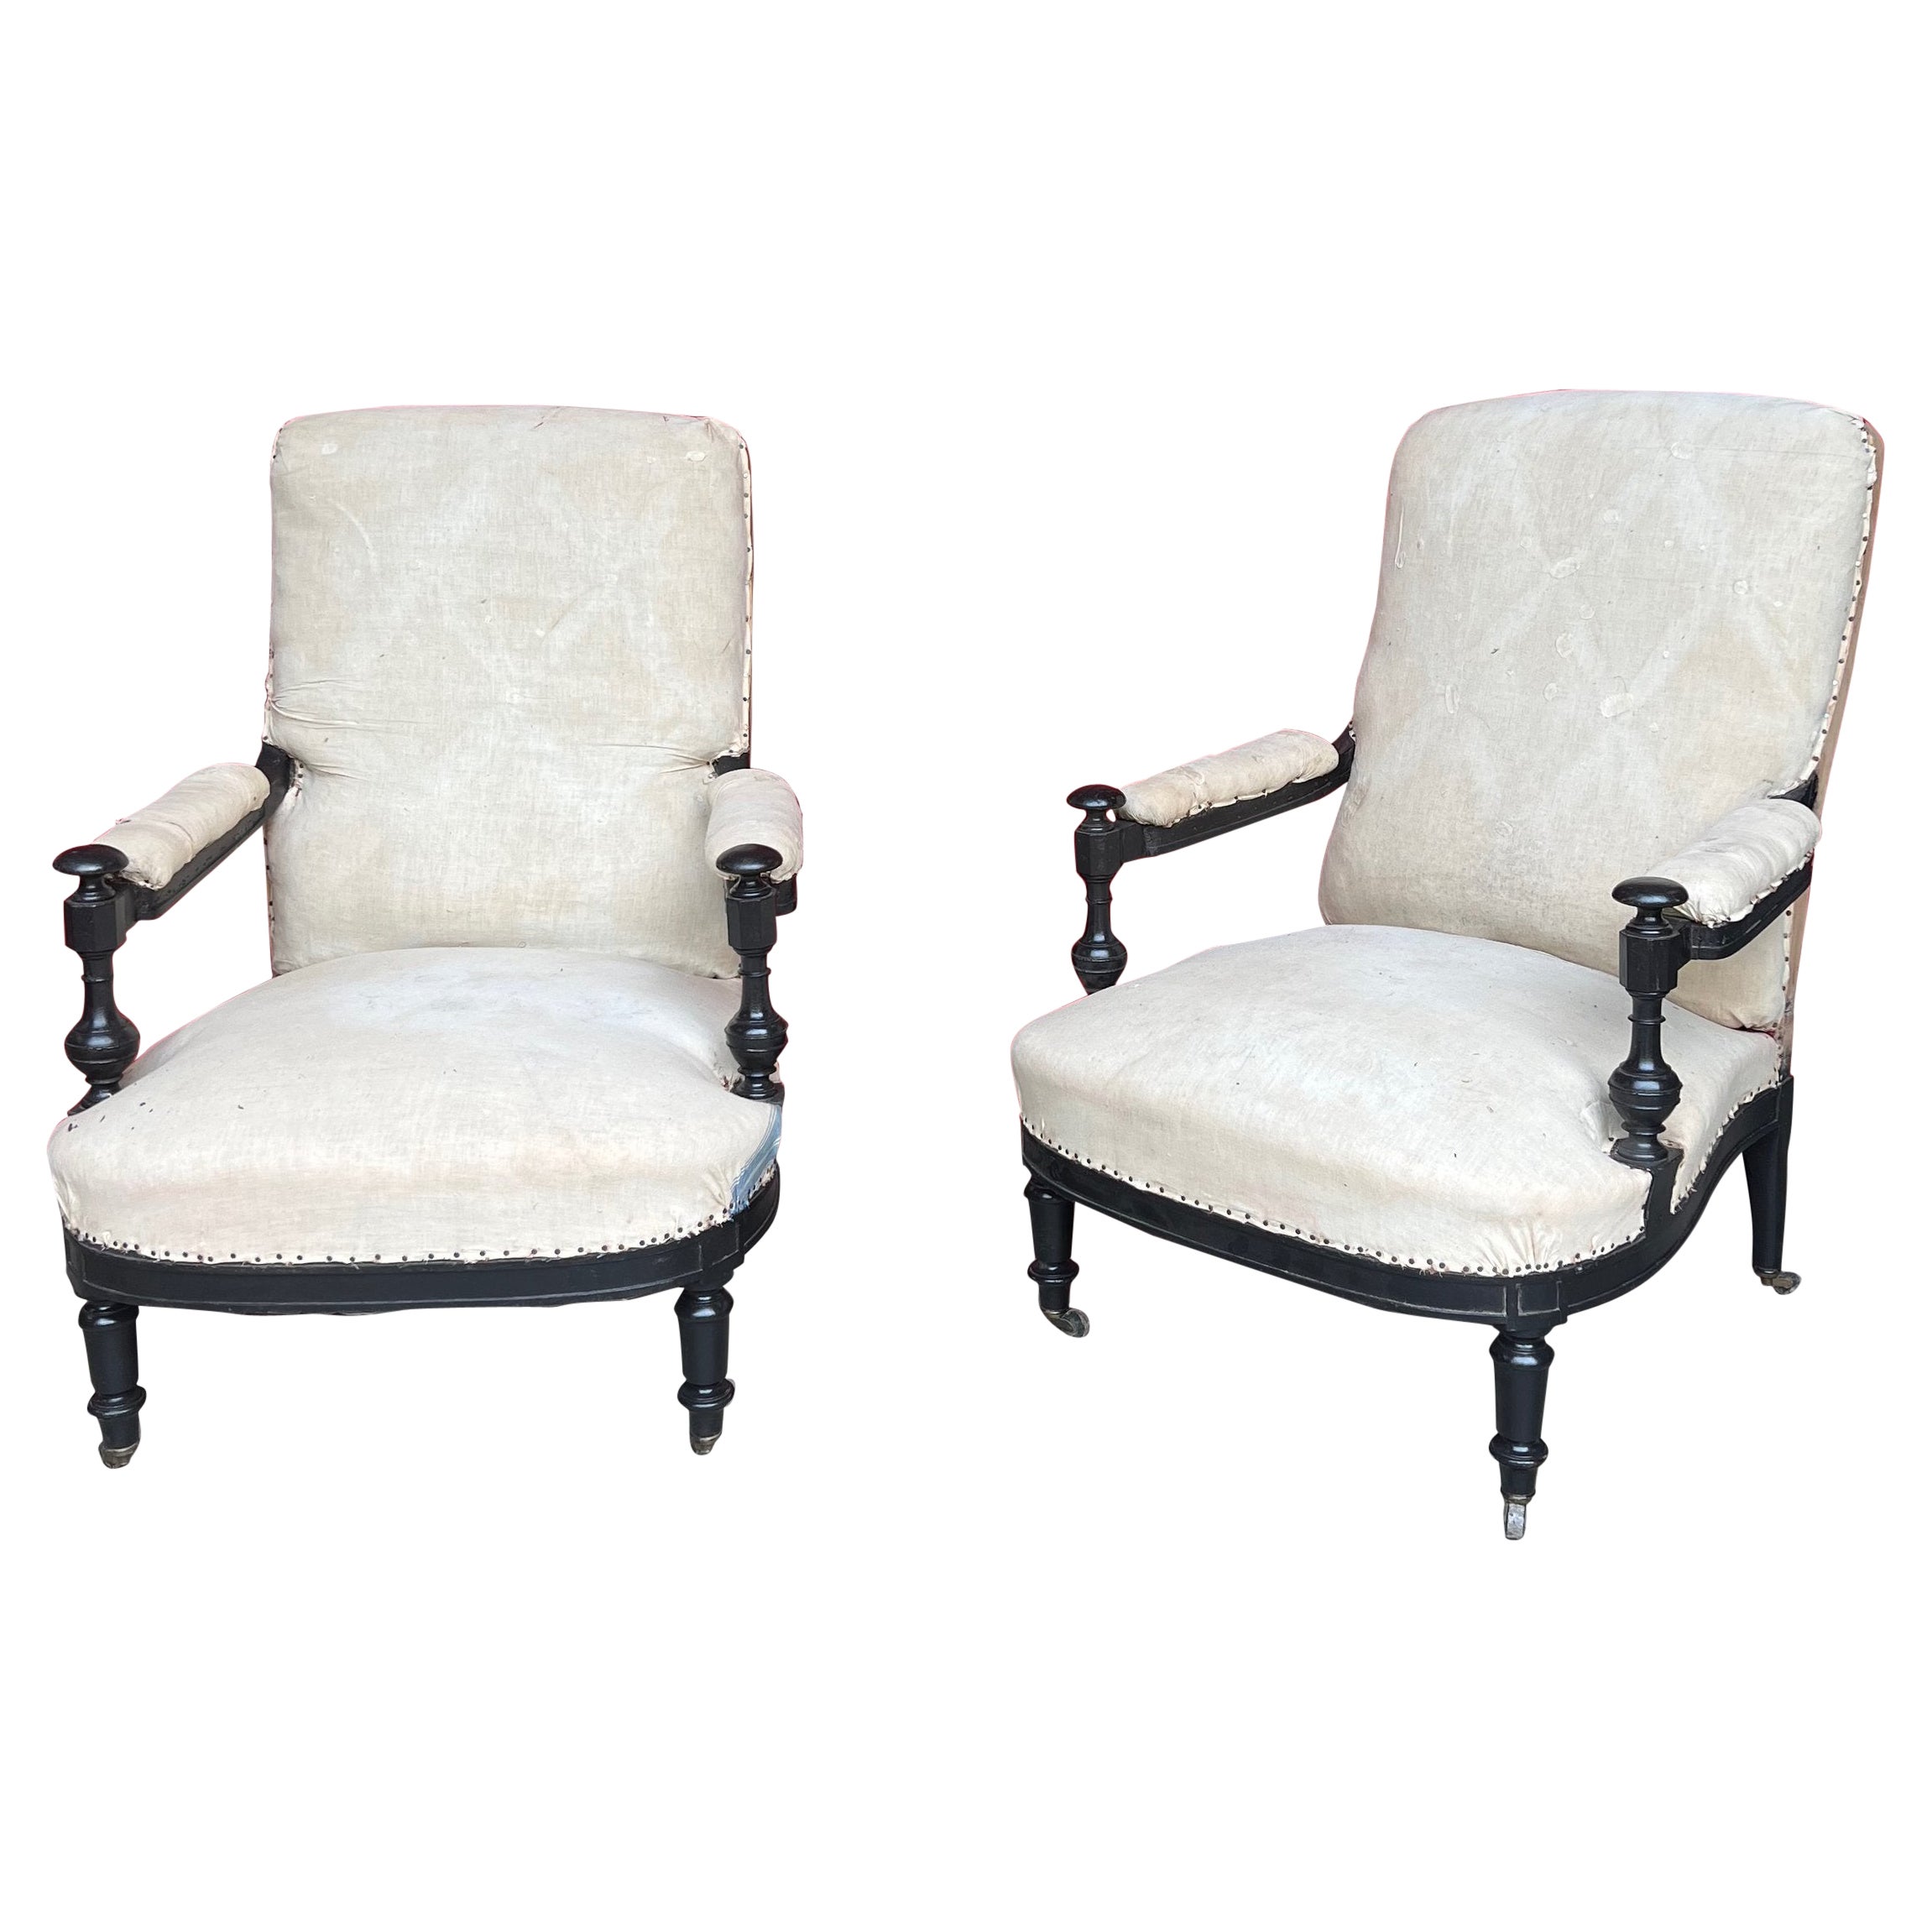 Pair of French Napoleon III Armchairs with Exposed Ebonized Frames